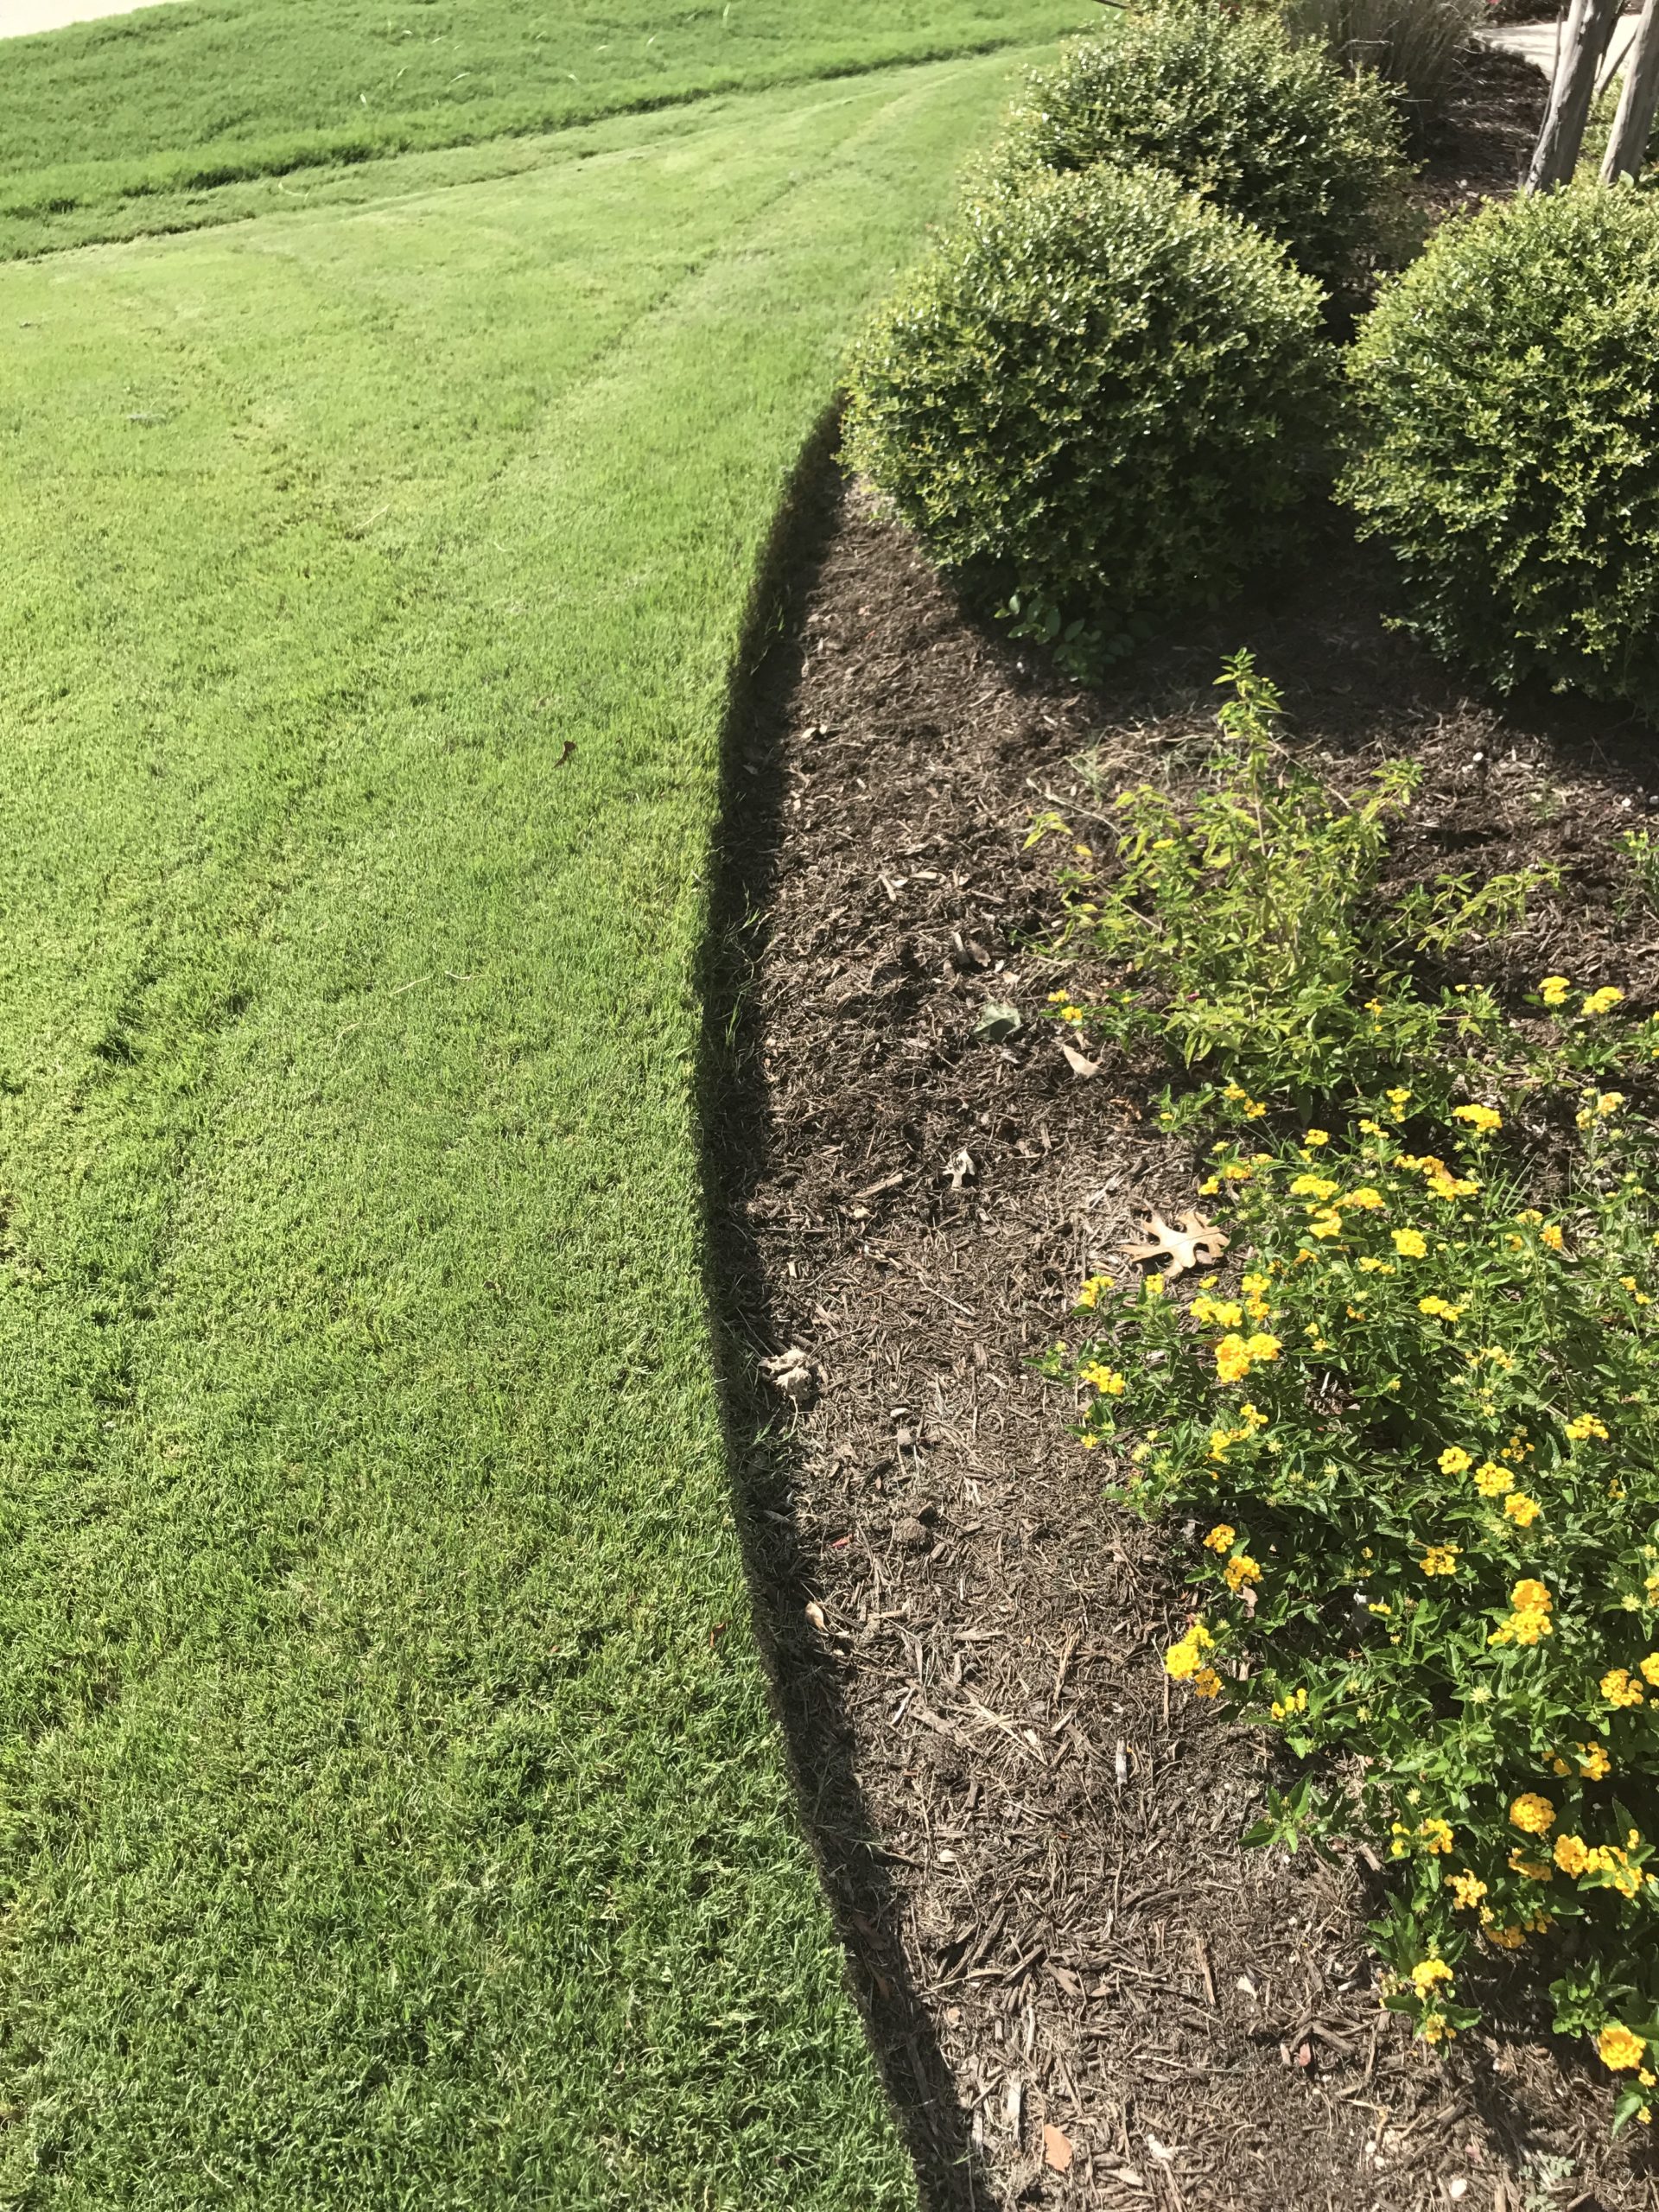 Summer Lawn Care in North Texas